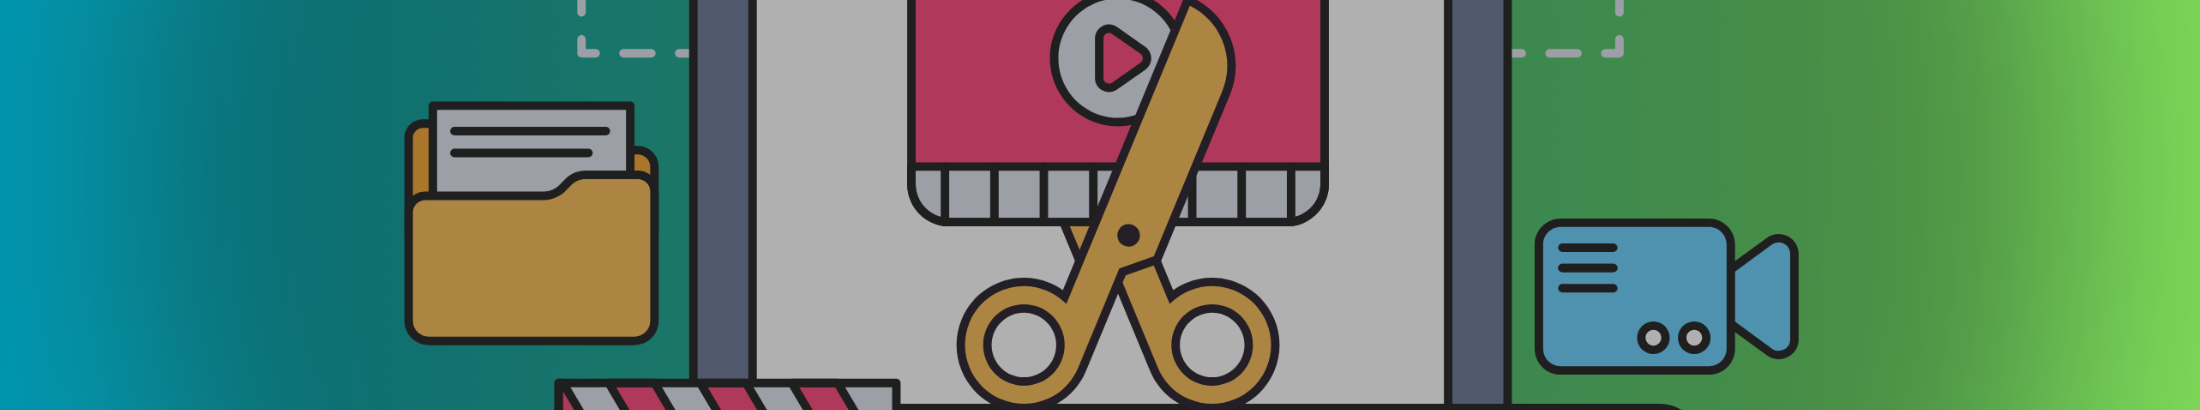 A graphic showing scissors cutting into a digital video reel